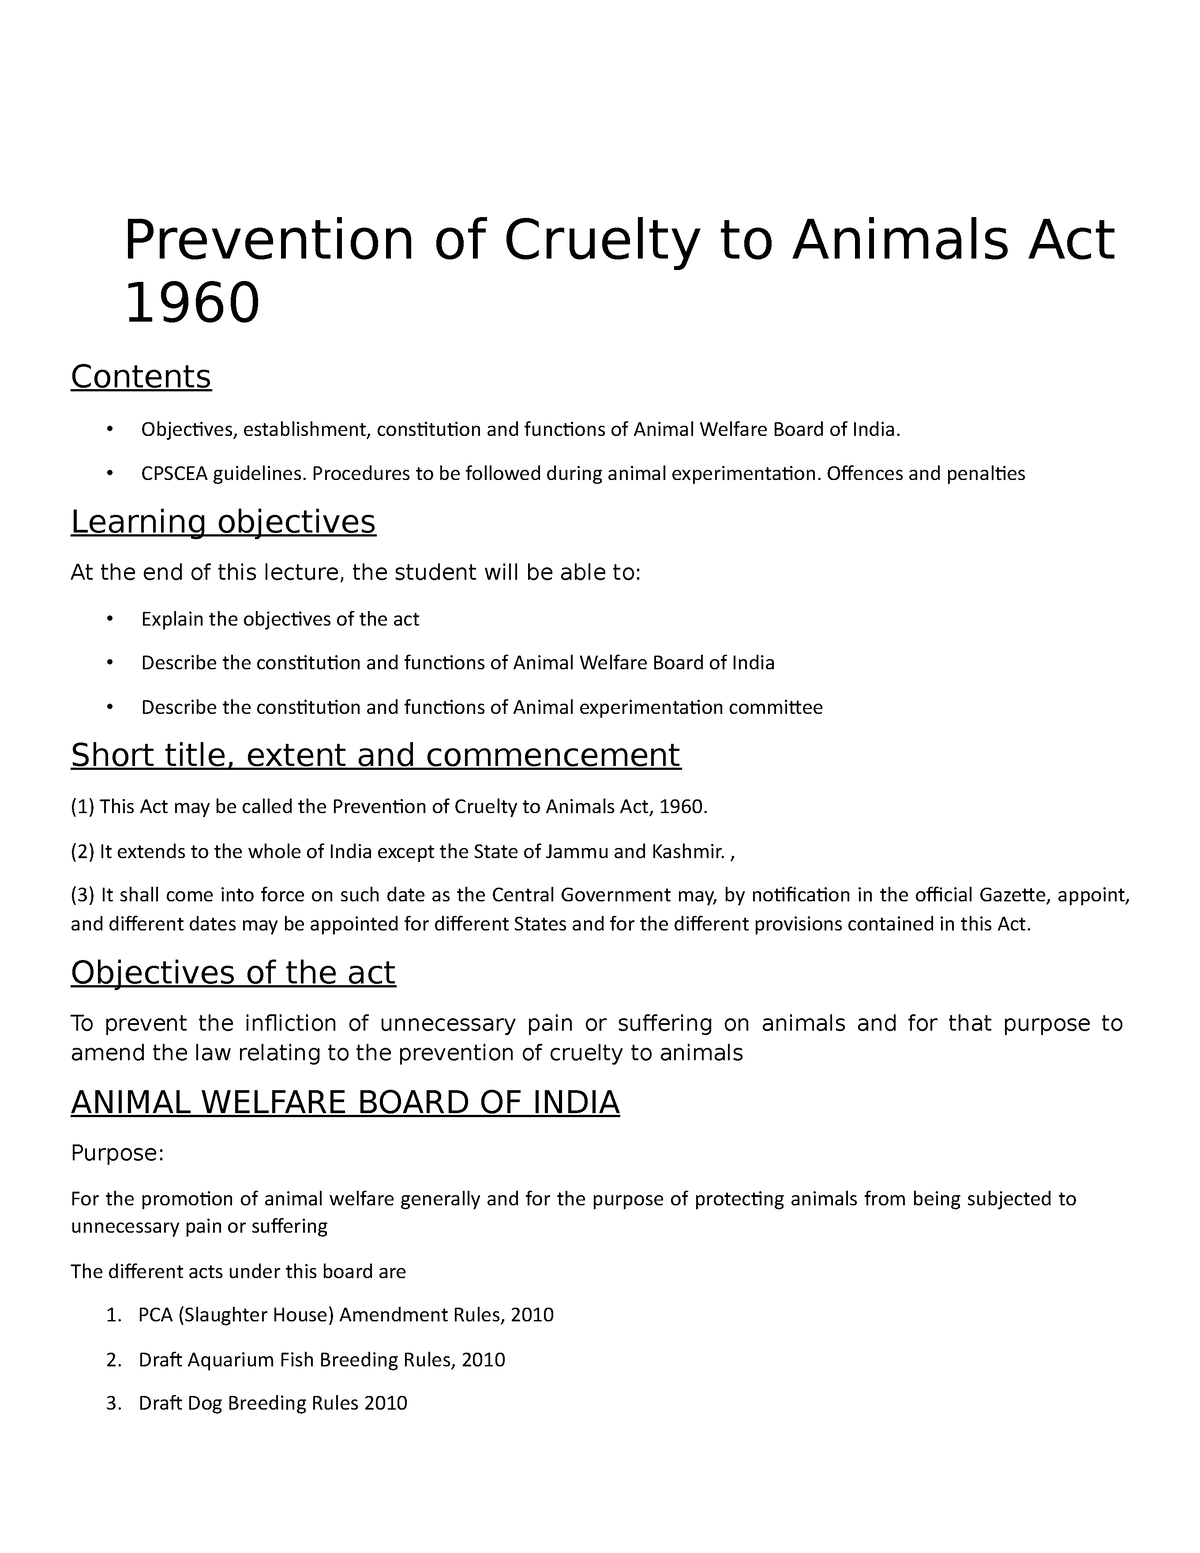 Chapter - 9 Prevention of Cruelty to Animals Act 1960 - Prevention of  Cruelty to Animals Act 1960 - Studocu